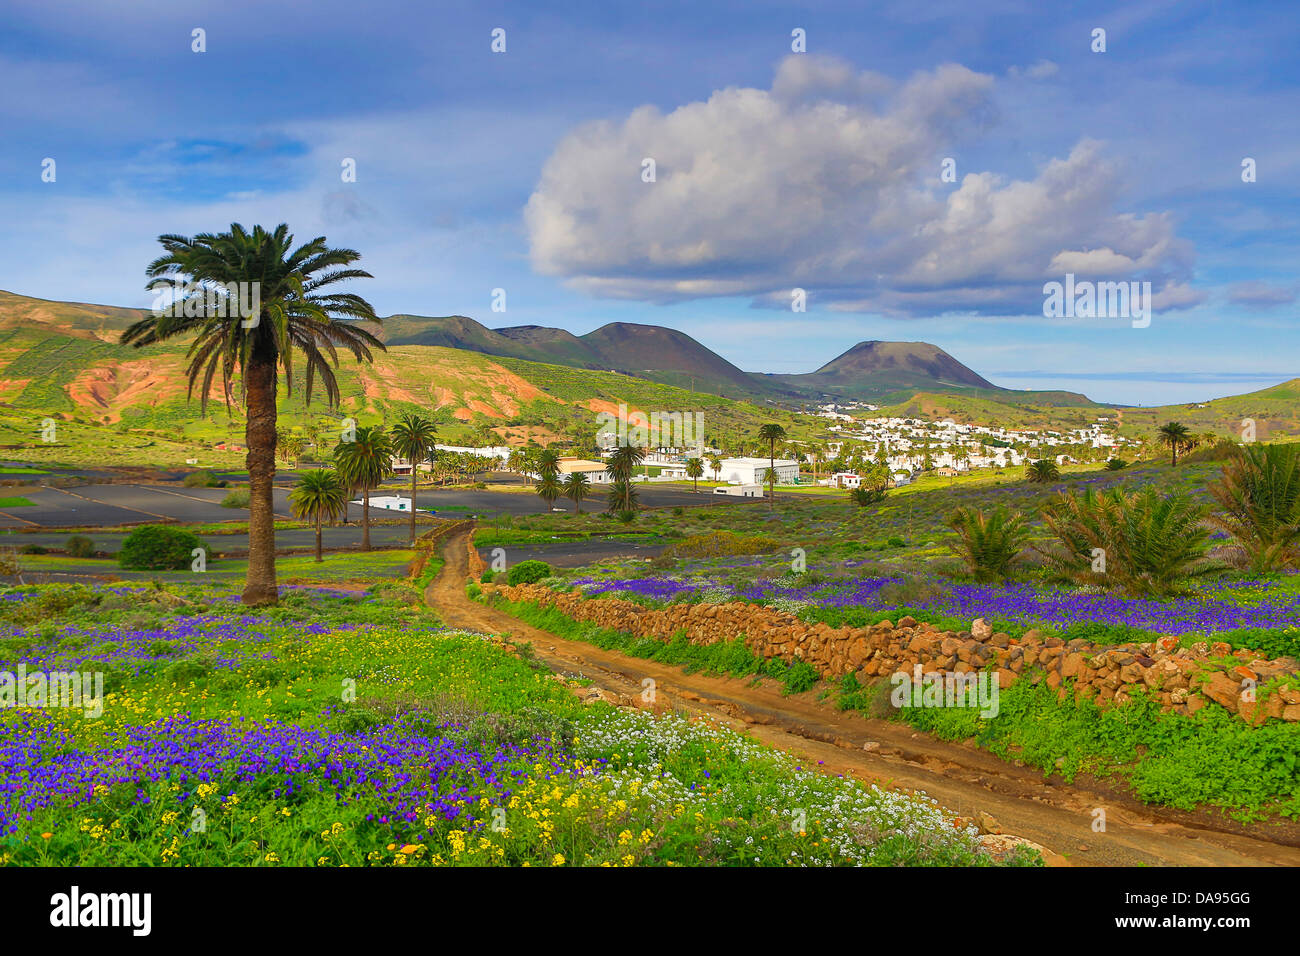 Spain, Europe, Canary Islands, Haria, Lanzarote, Mague, Village, agriculture, colourful, flowers, island, landscape, palm tree, Stock Photo